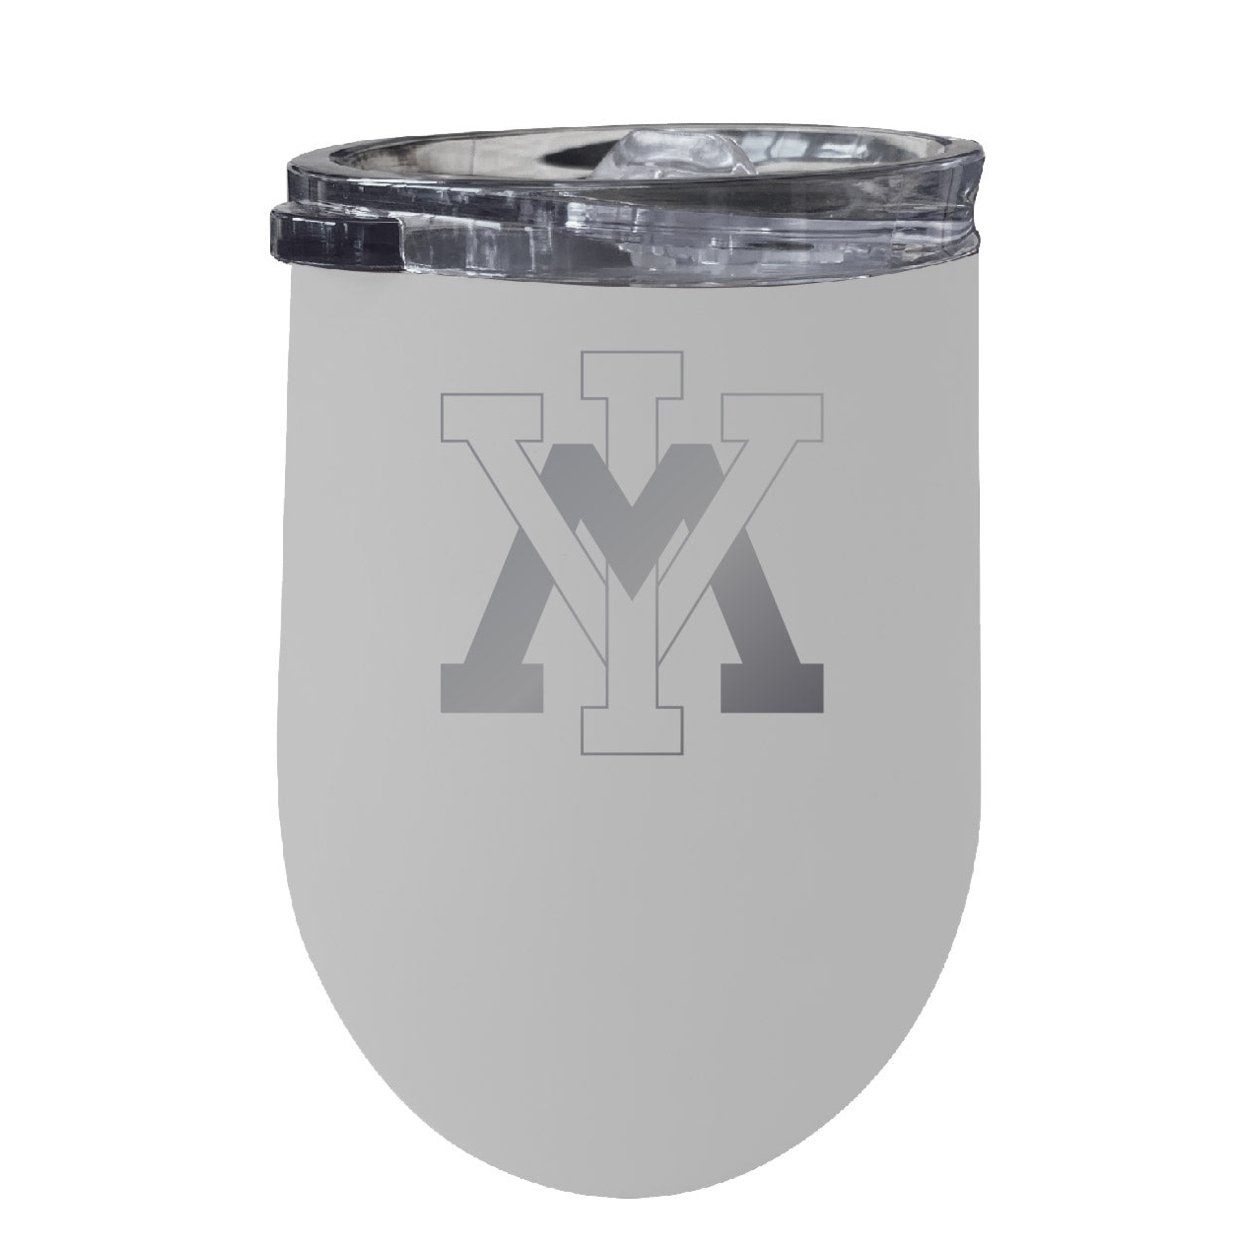 VMI Keydets 12 Oz Etched Insulated Wine Stainless Steel Tumbler - Choose Your Color - White